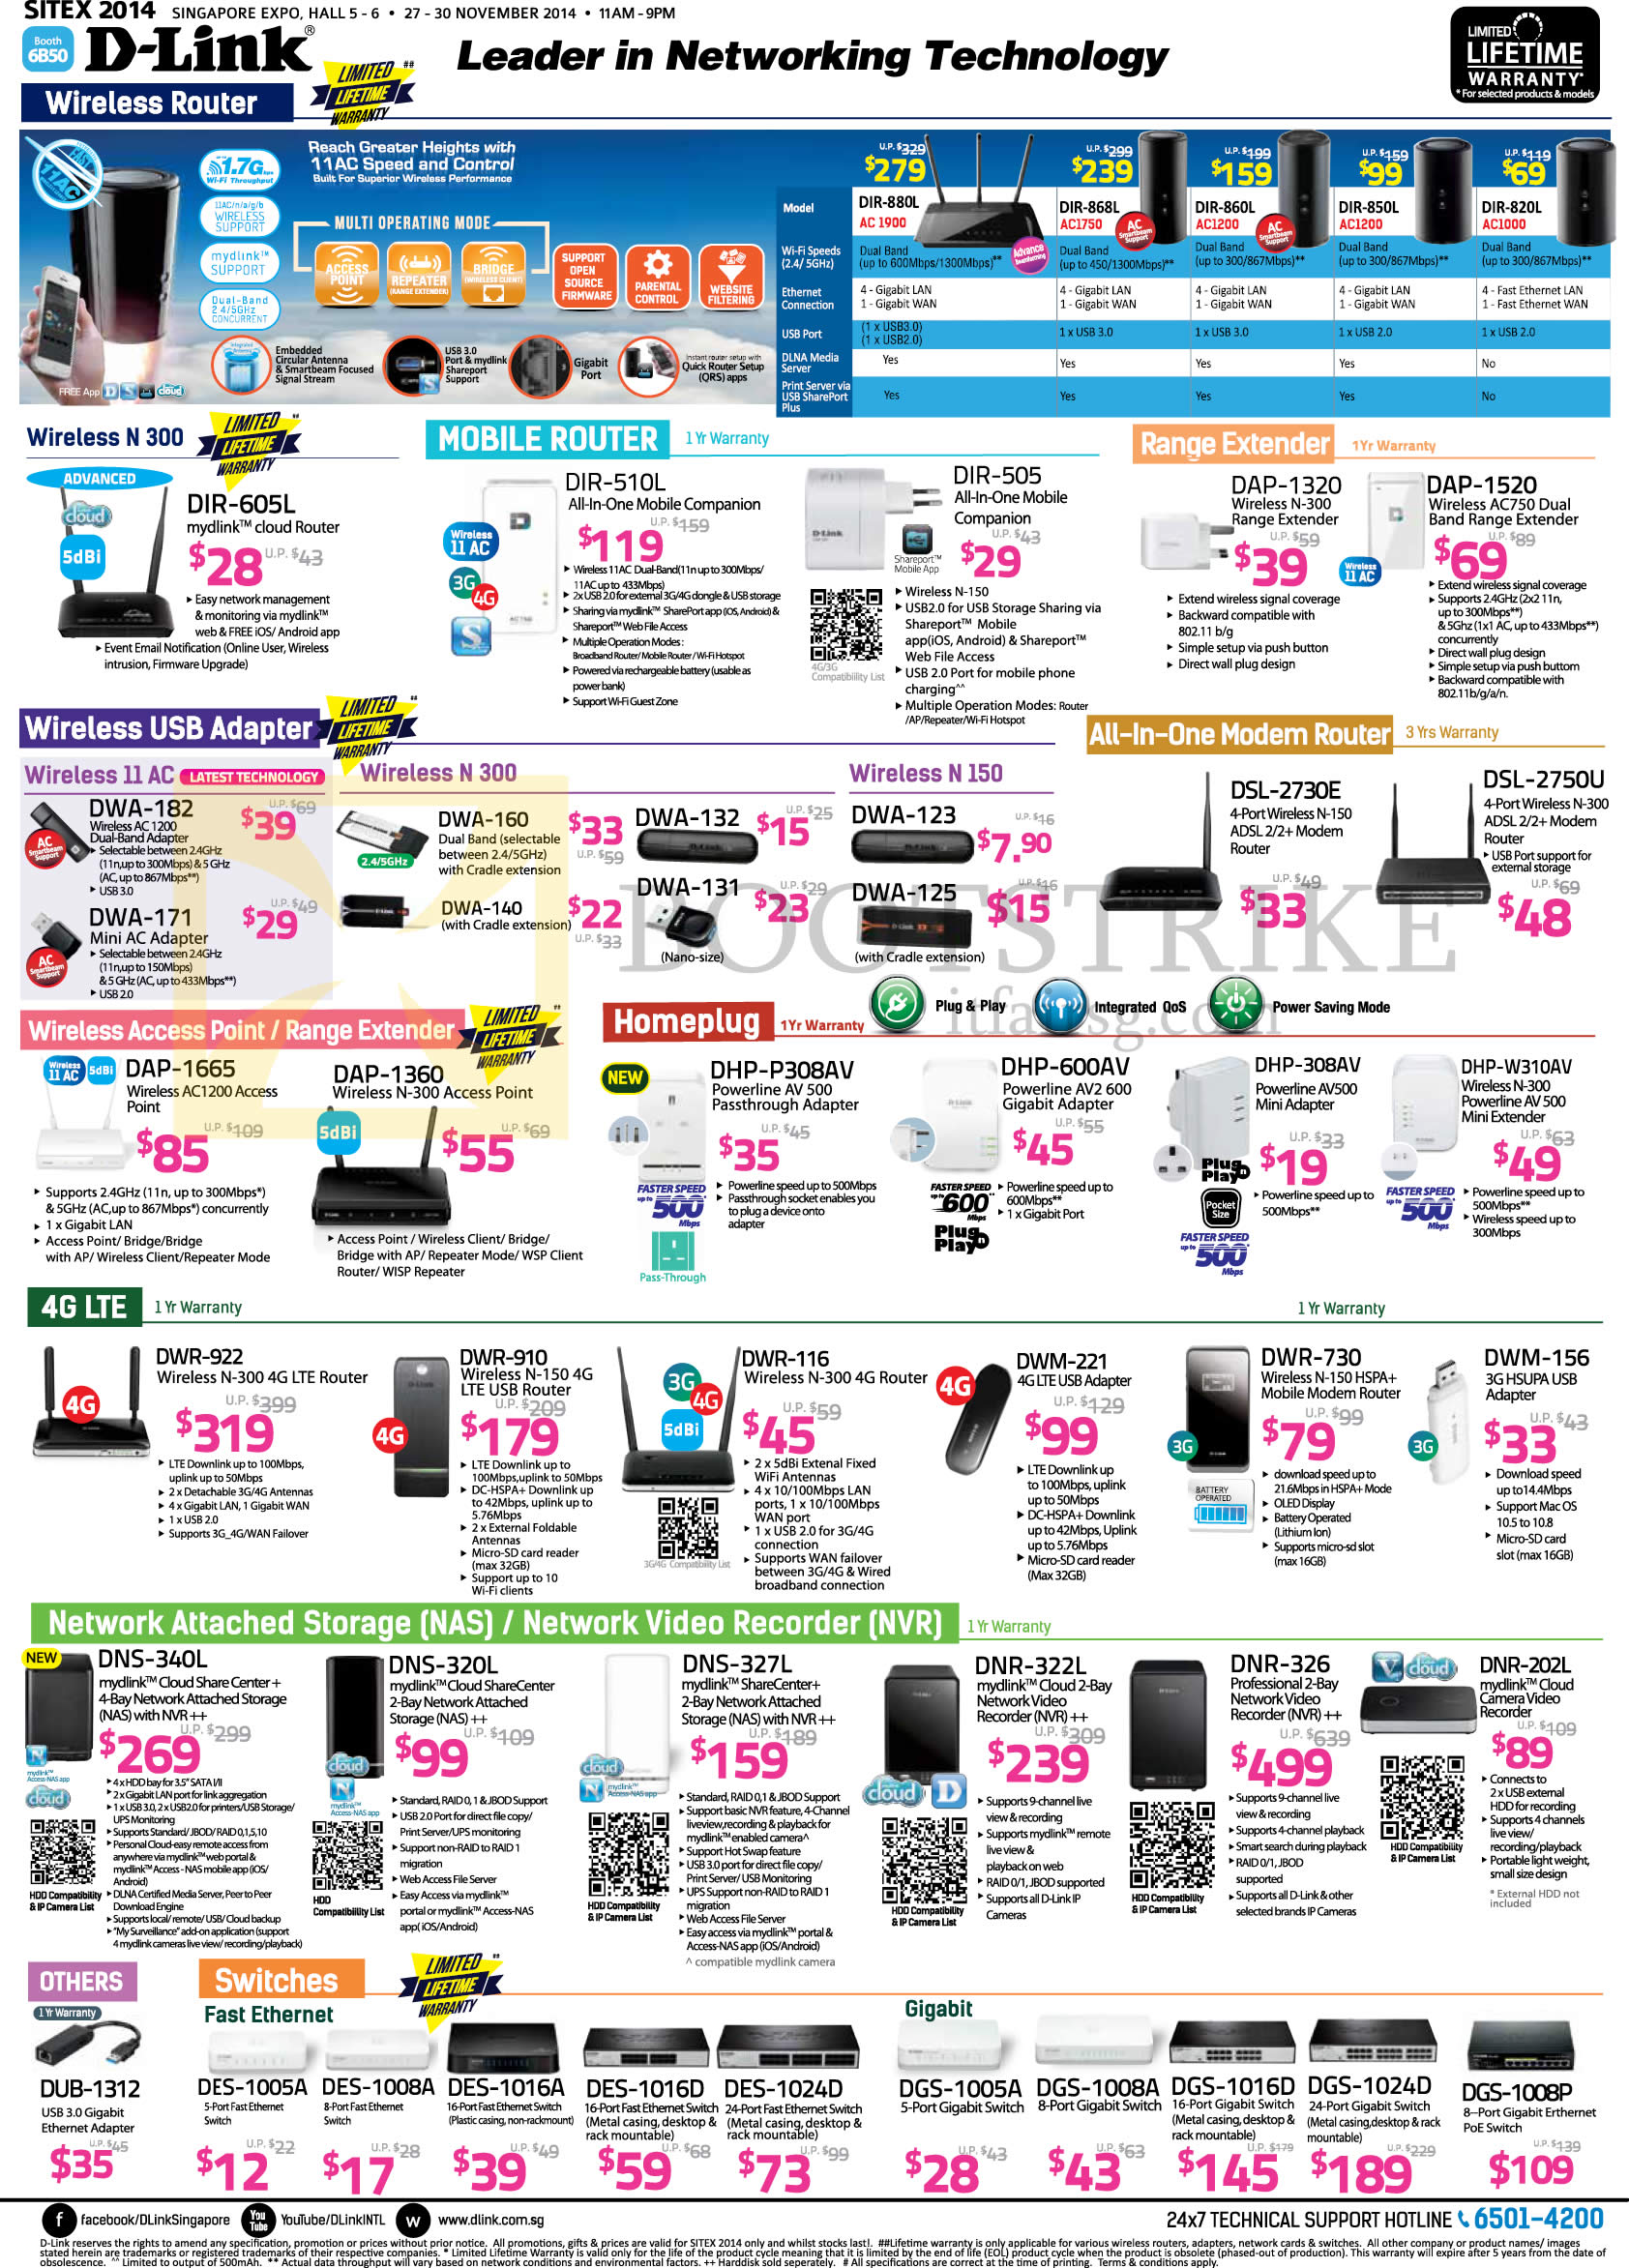 SITEX 2014 price list image brochure of D-Link Networking Routers, Wireless USB Adapters, Access Point, Range Extender, Homeplug, 4G LTE, NAS NVR, Switch, Ethernet Adapter